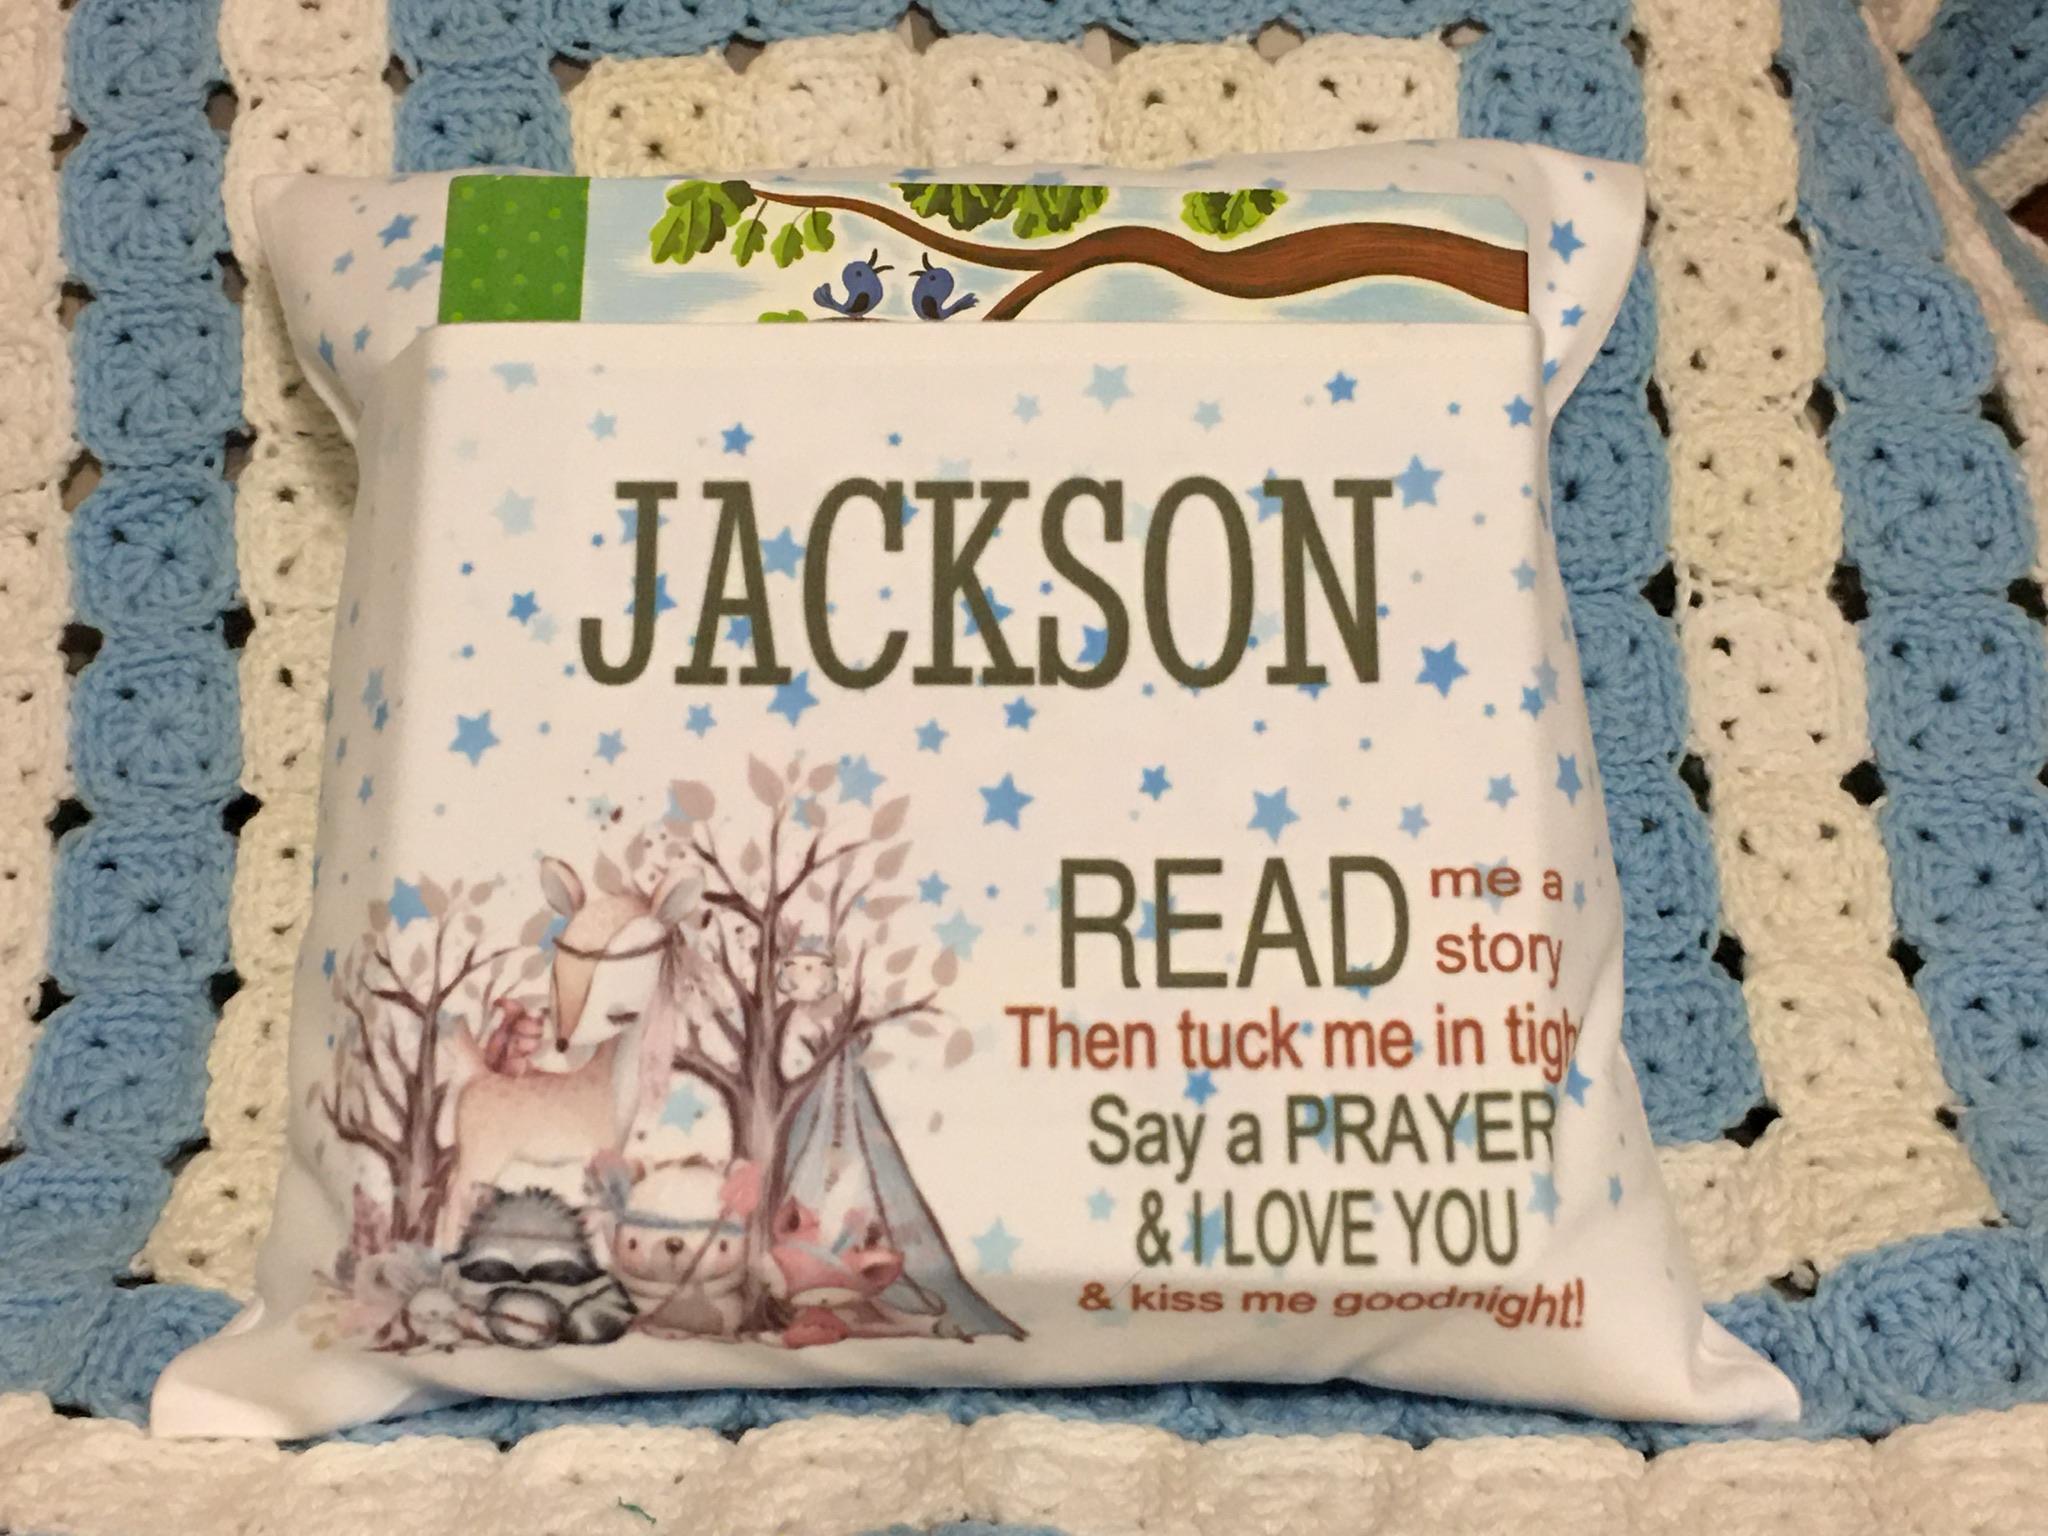 After watching Cheryl Kuchek make a little book pillow with these, I decided that I had to make